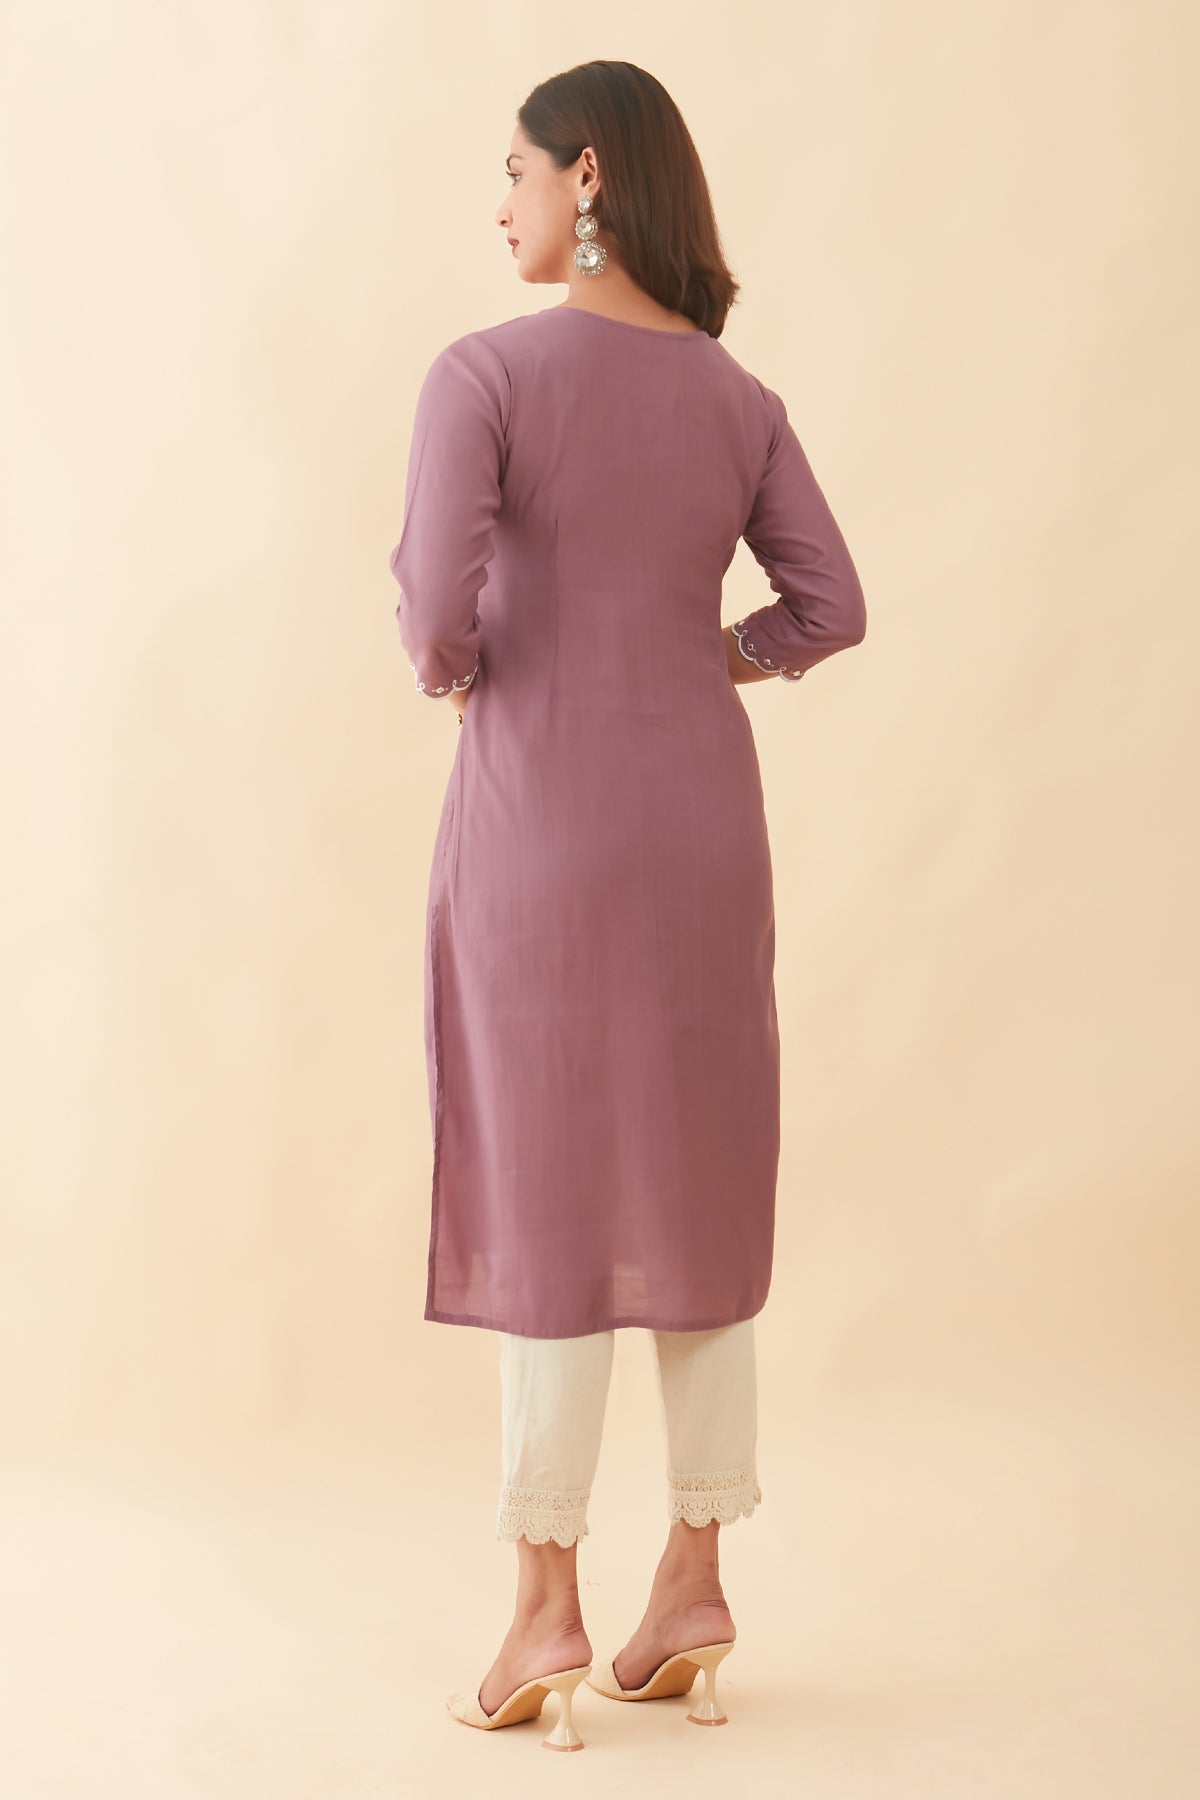 Floral Embroidered With Foil Mirror Embellished Kurta - Purple